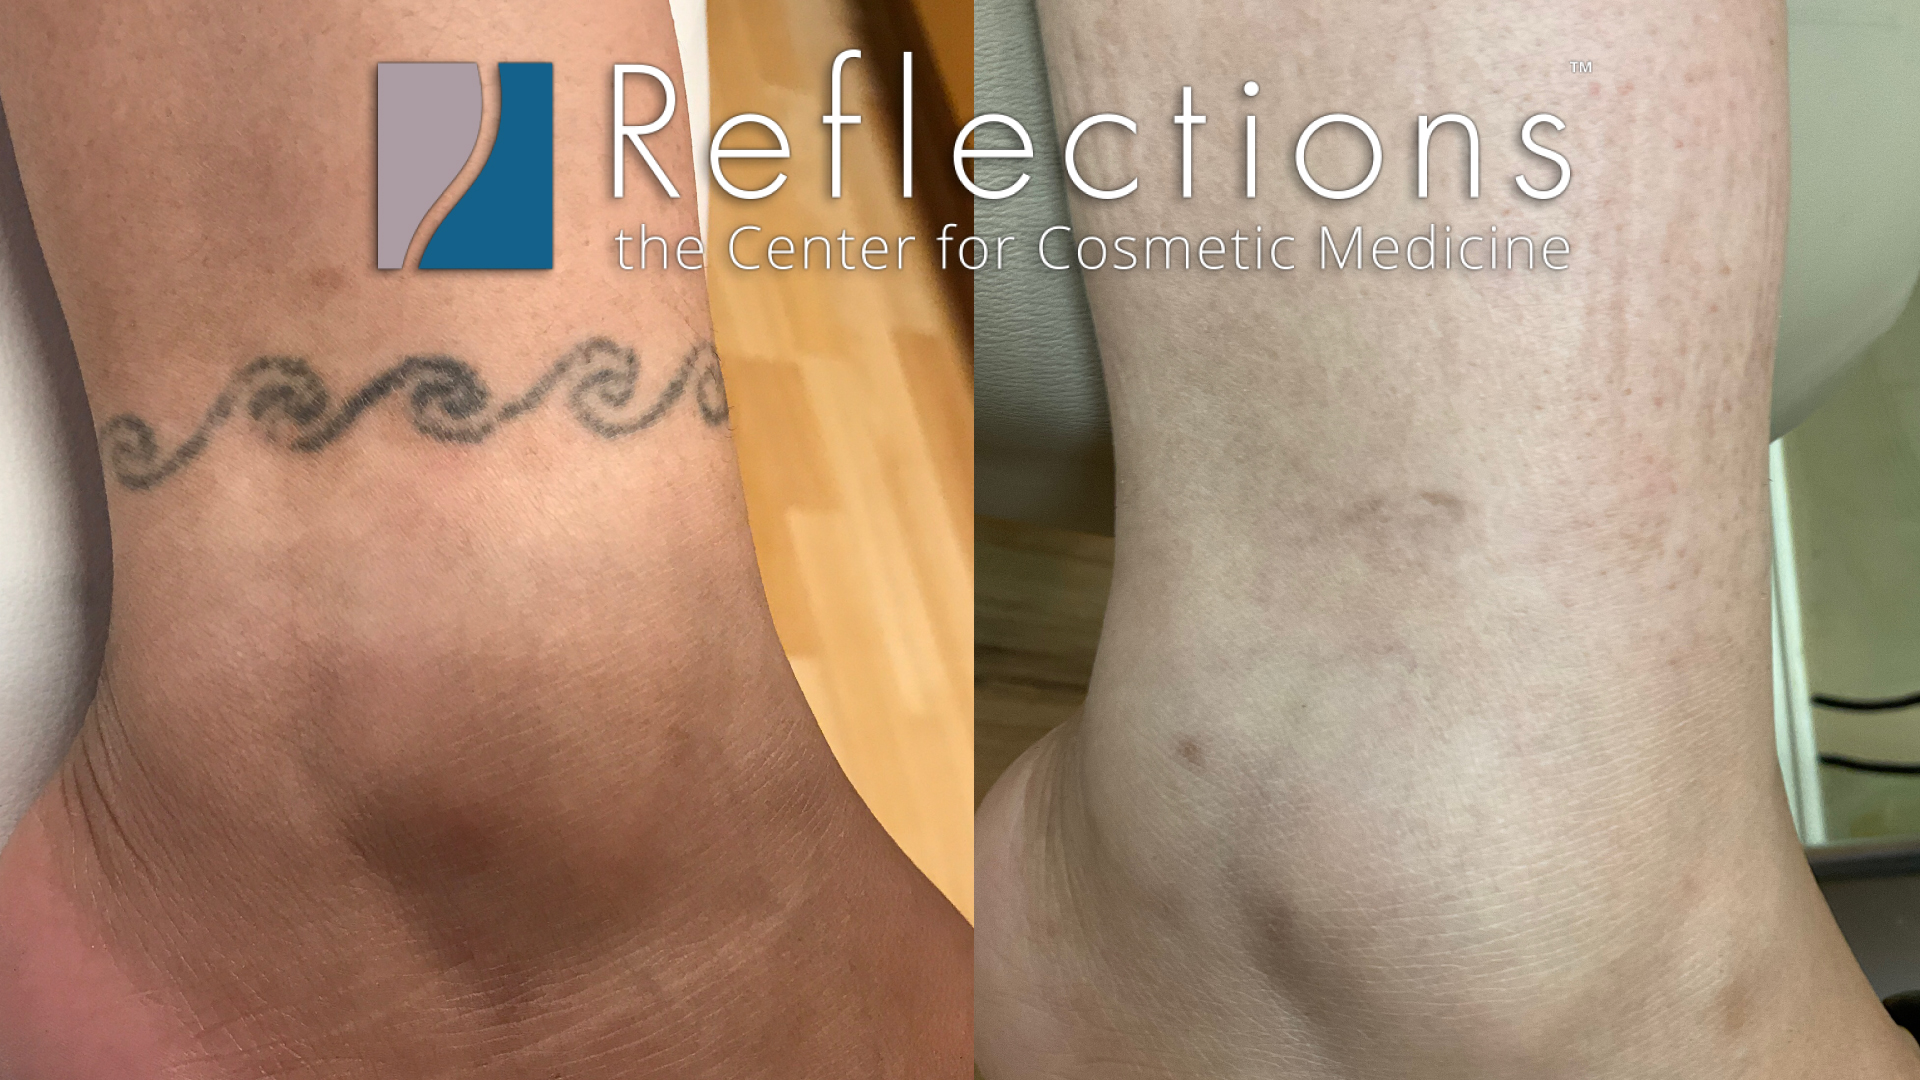 Ankle Wave Tattoo Removed with 3 Sessions of PiQo4 Laser Tattoo Removal for Asian Woman Before & After Photos New Jersey - Reflections Center